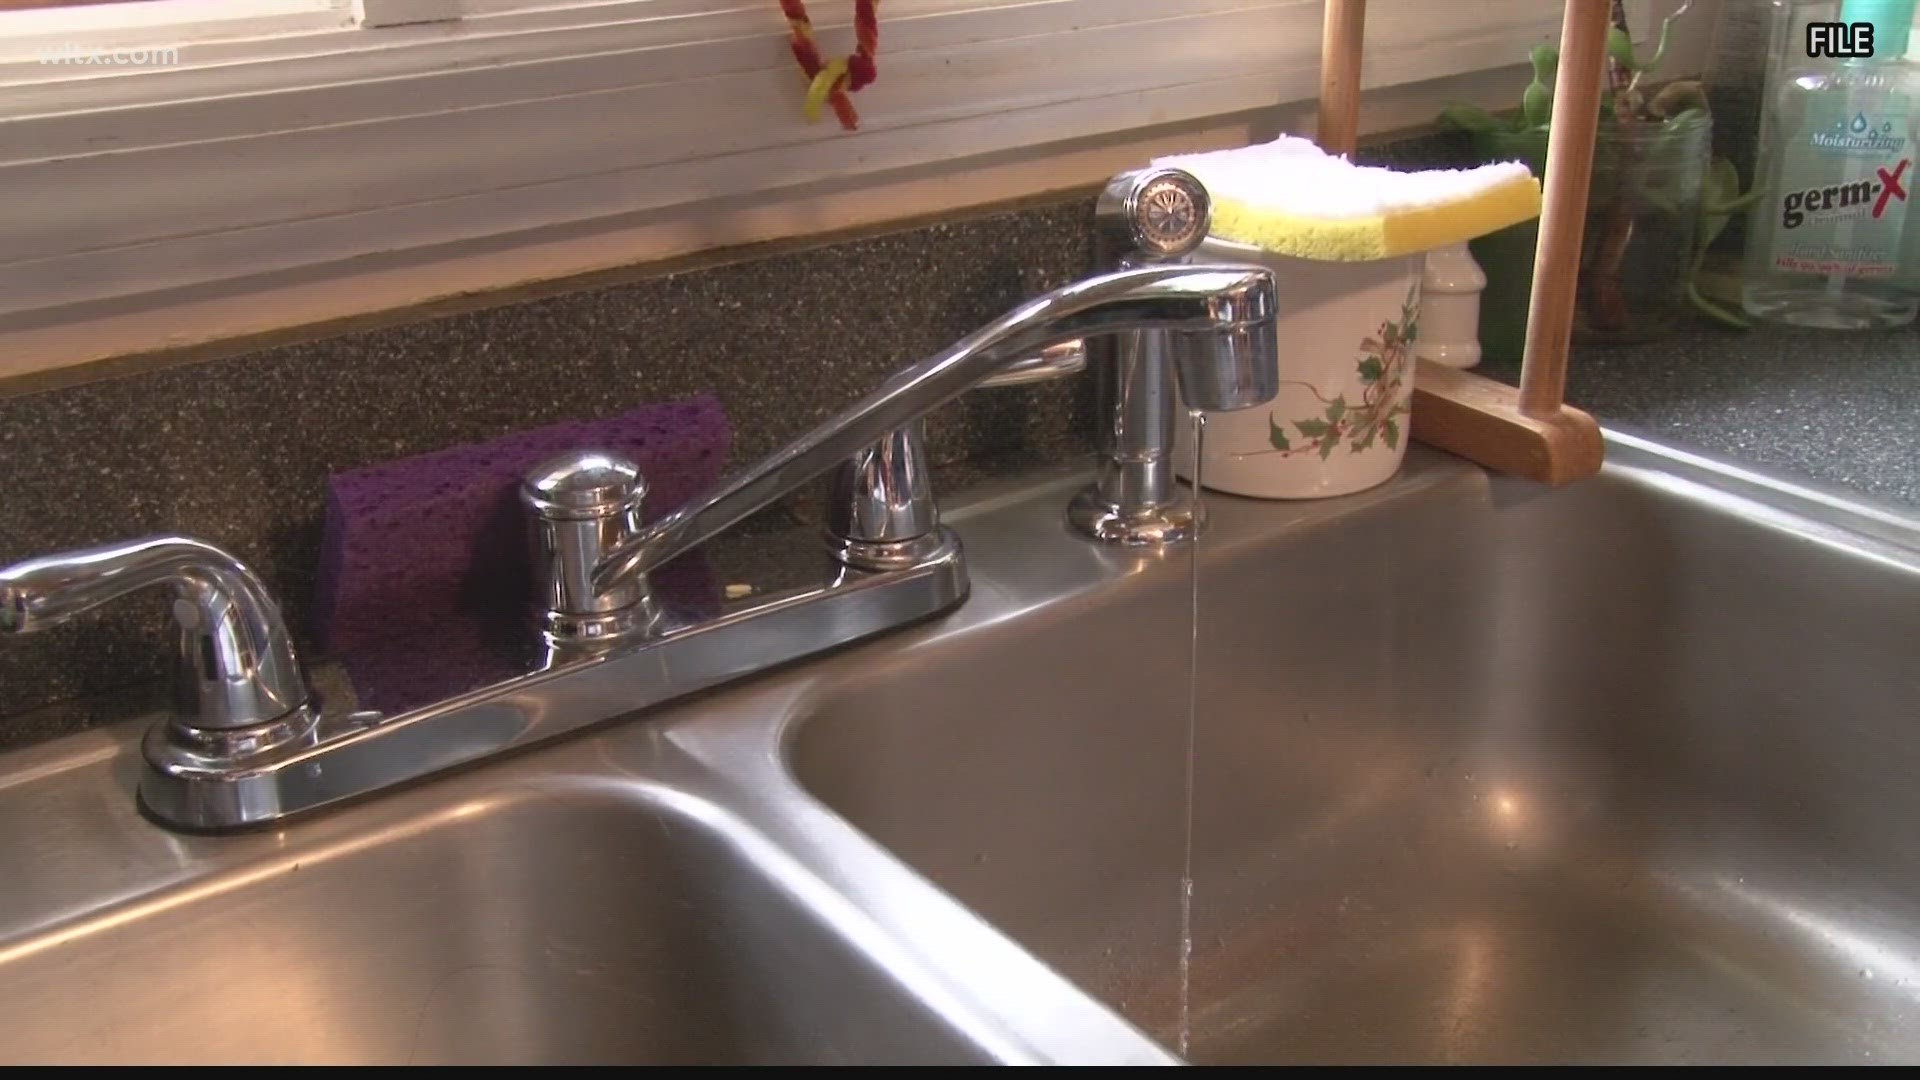 Frozen pipes can lead to thousands of dollars in damages for homeowners.